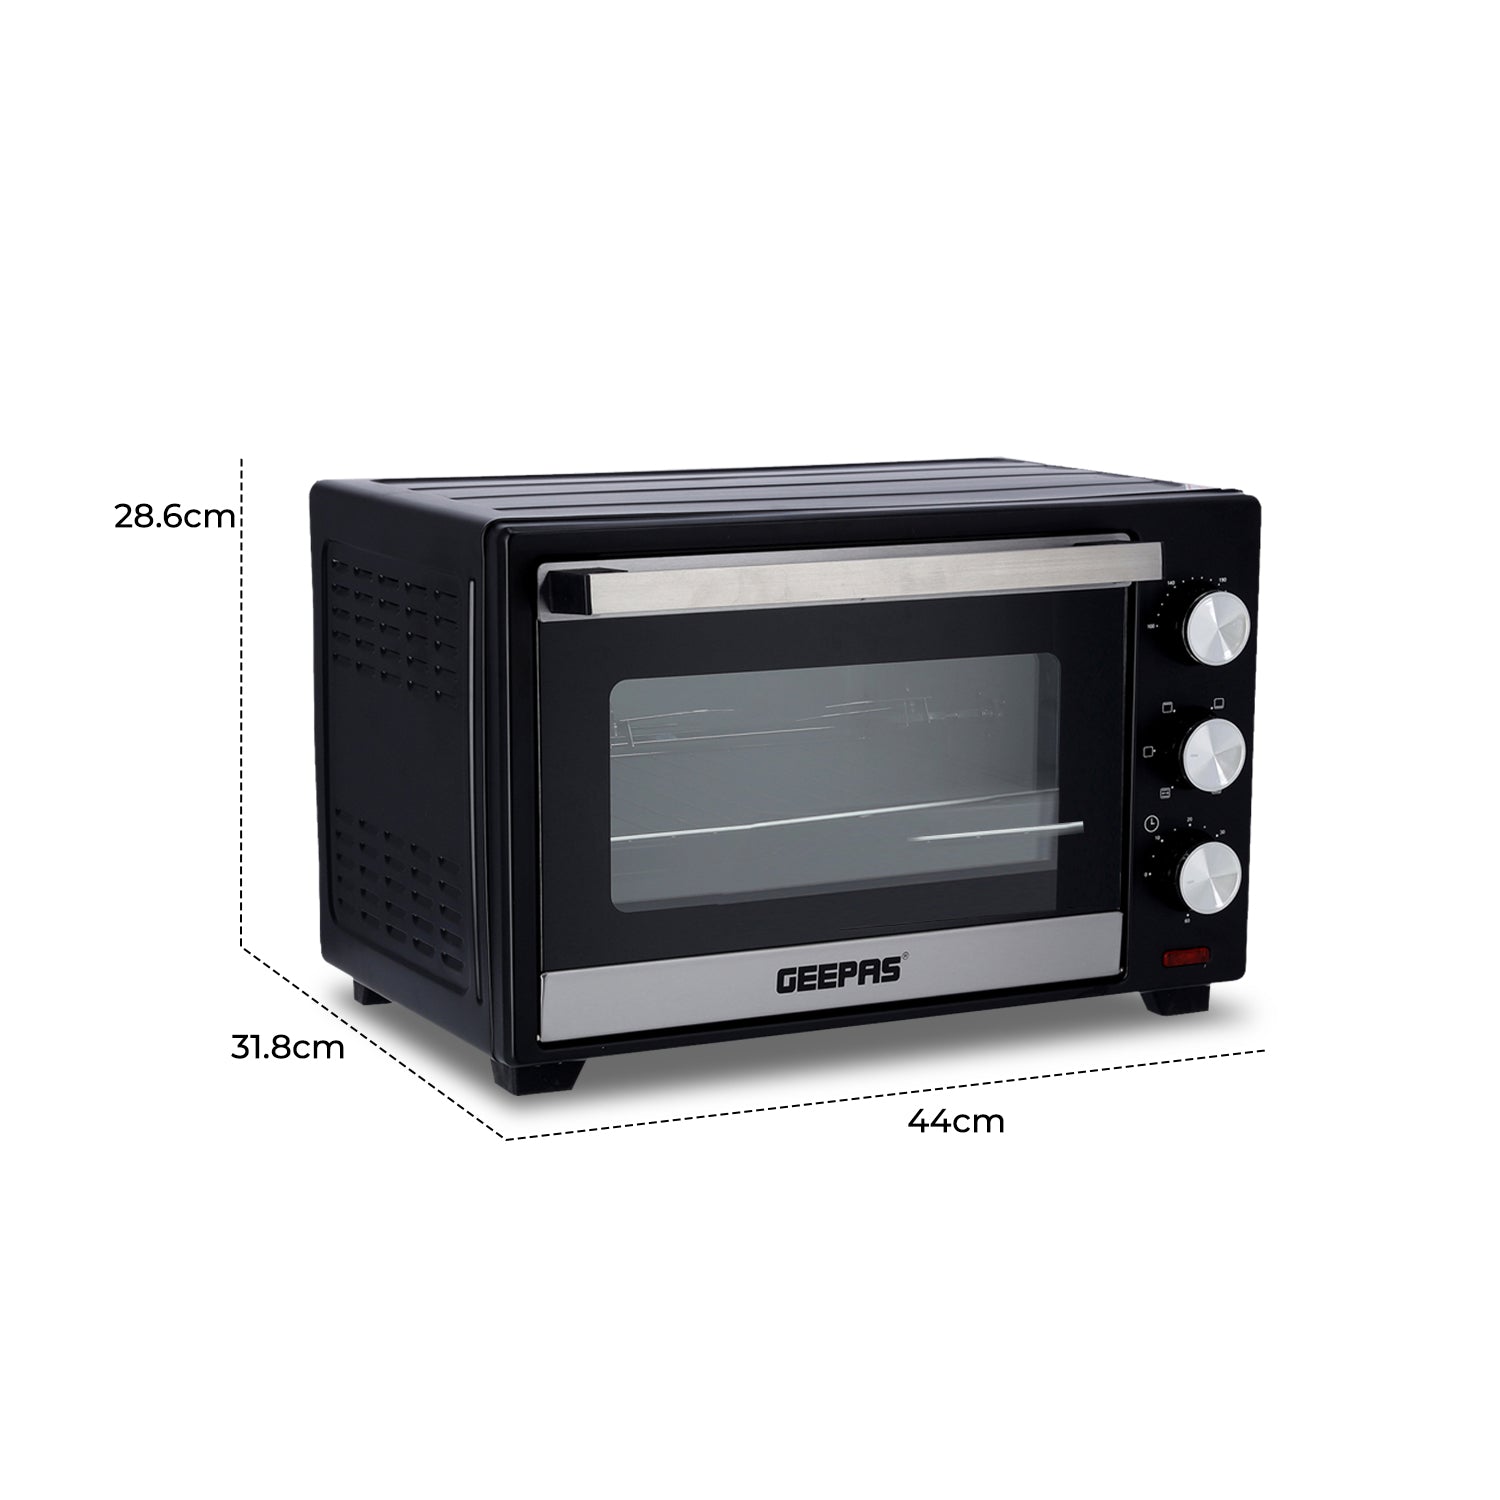 19L Portable Electric Oven With Grill and Rotisserie